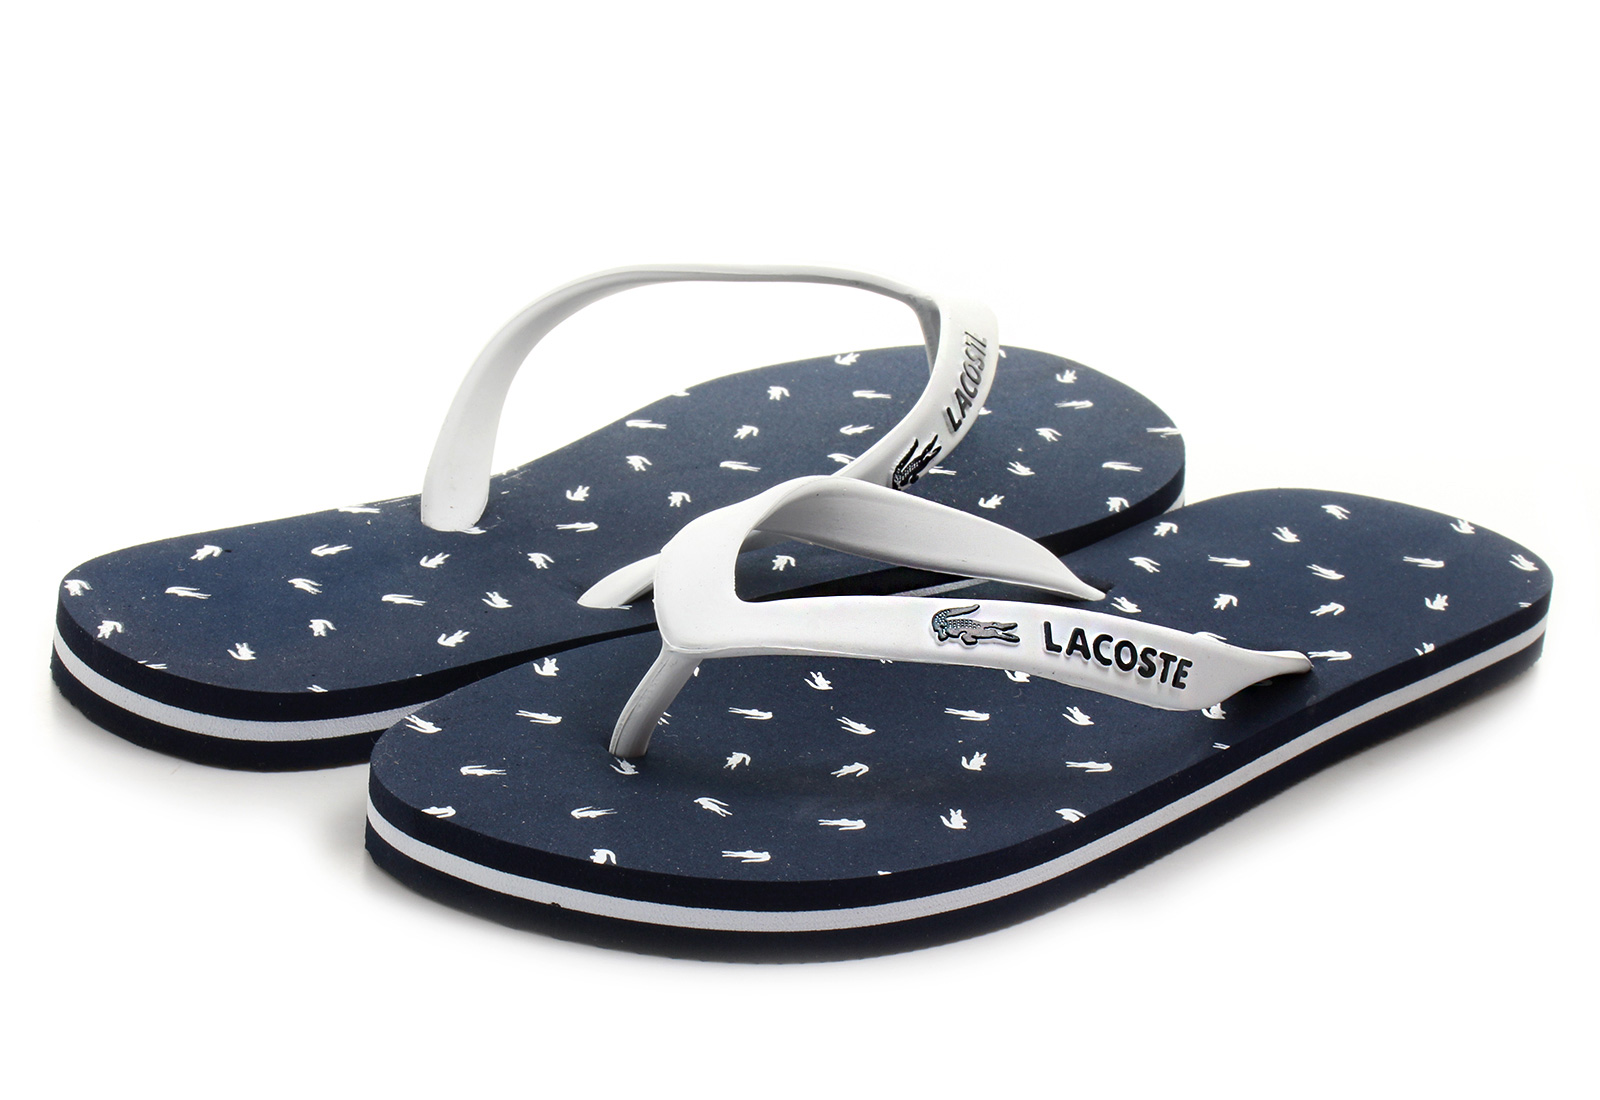 Lacoste Slippers - Ancelle - 151spw1001-x96 - Online shop for sneakers ...